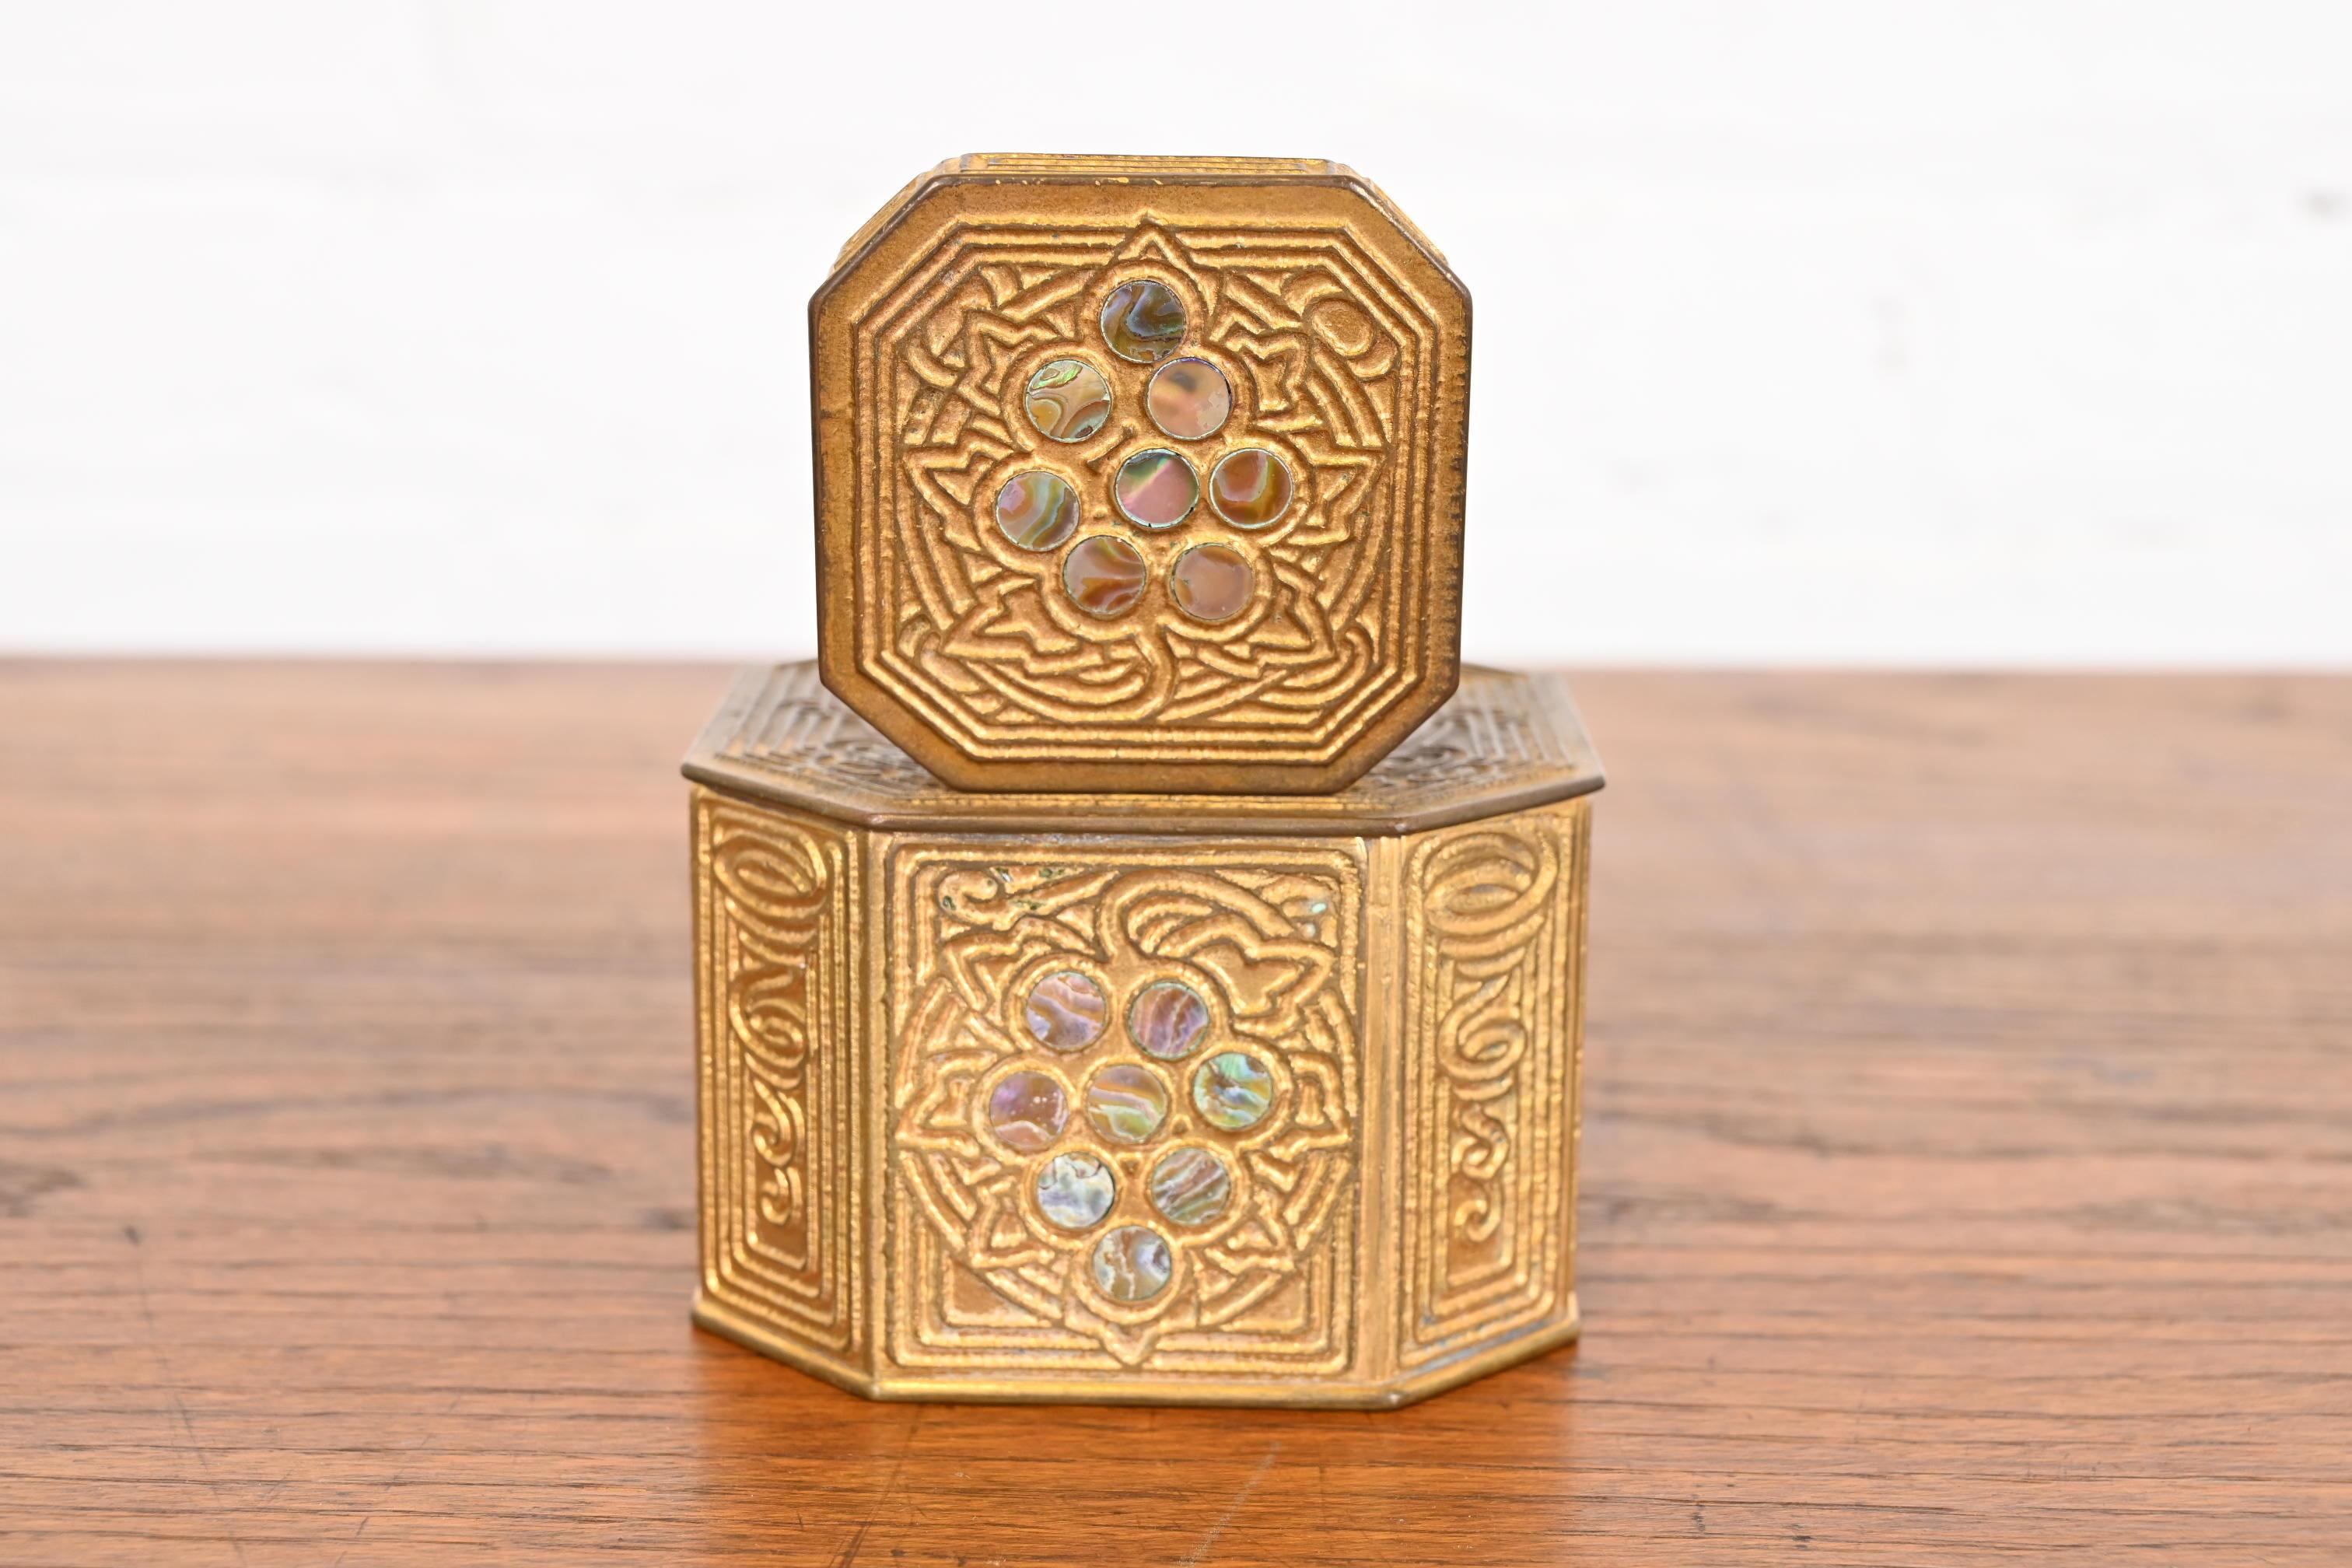 Tiffany Studios New York Bronze Doré and Abalone Inkwell For Sale 7